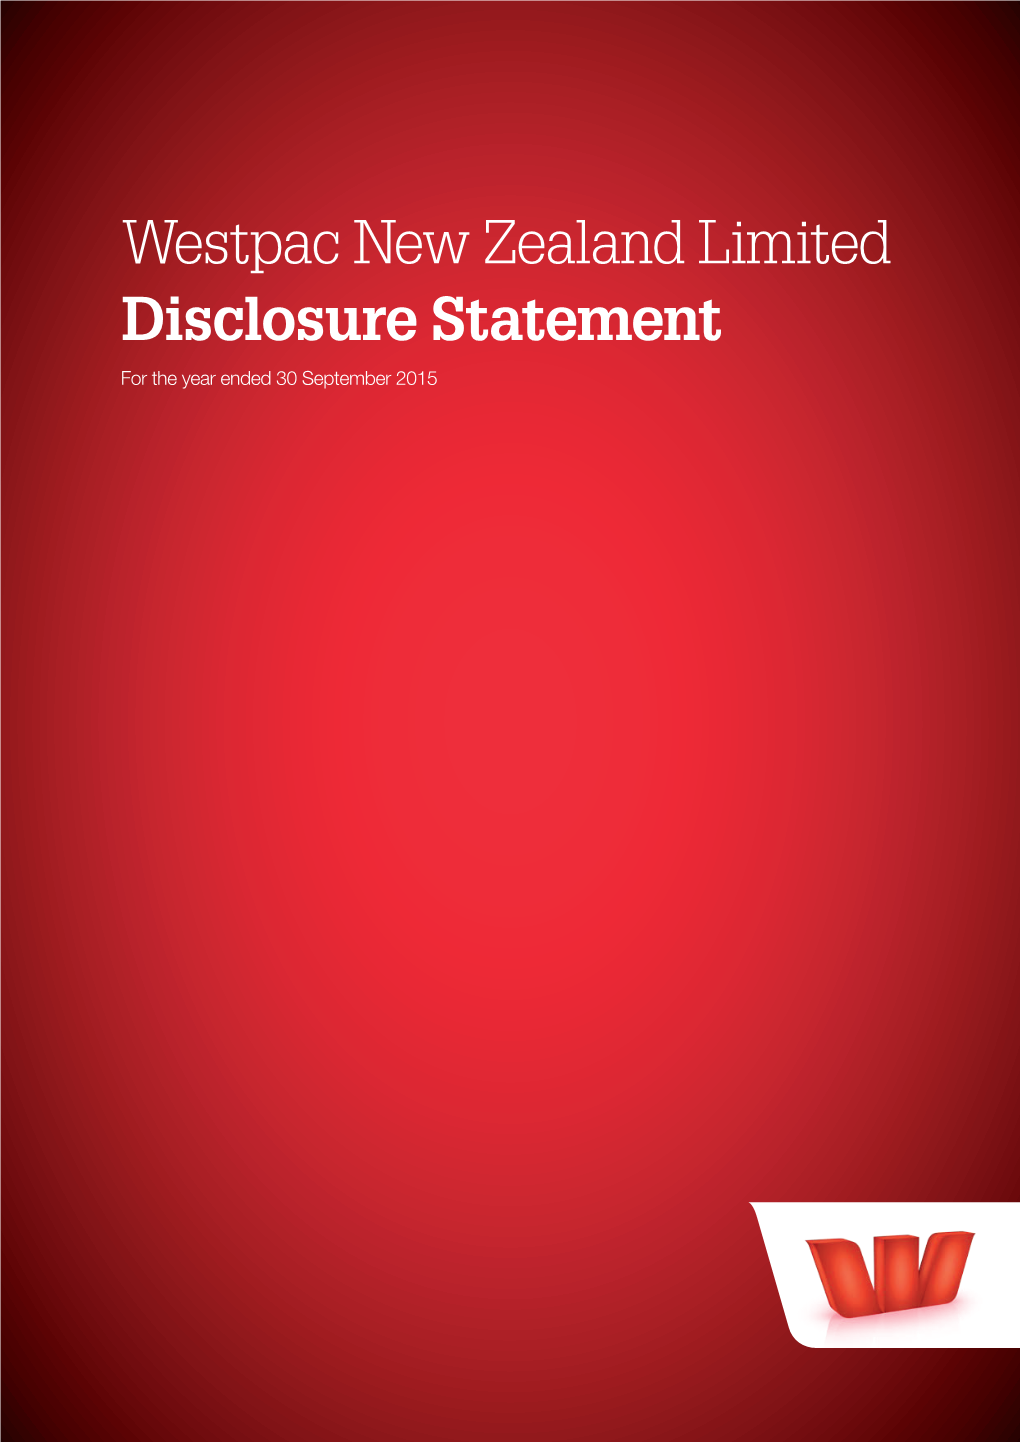 Westpac New Zealand Limited Disclosure Statement